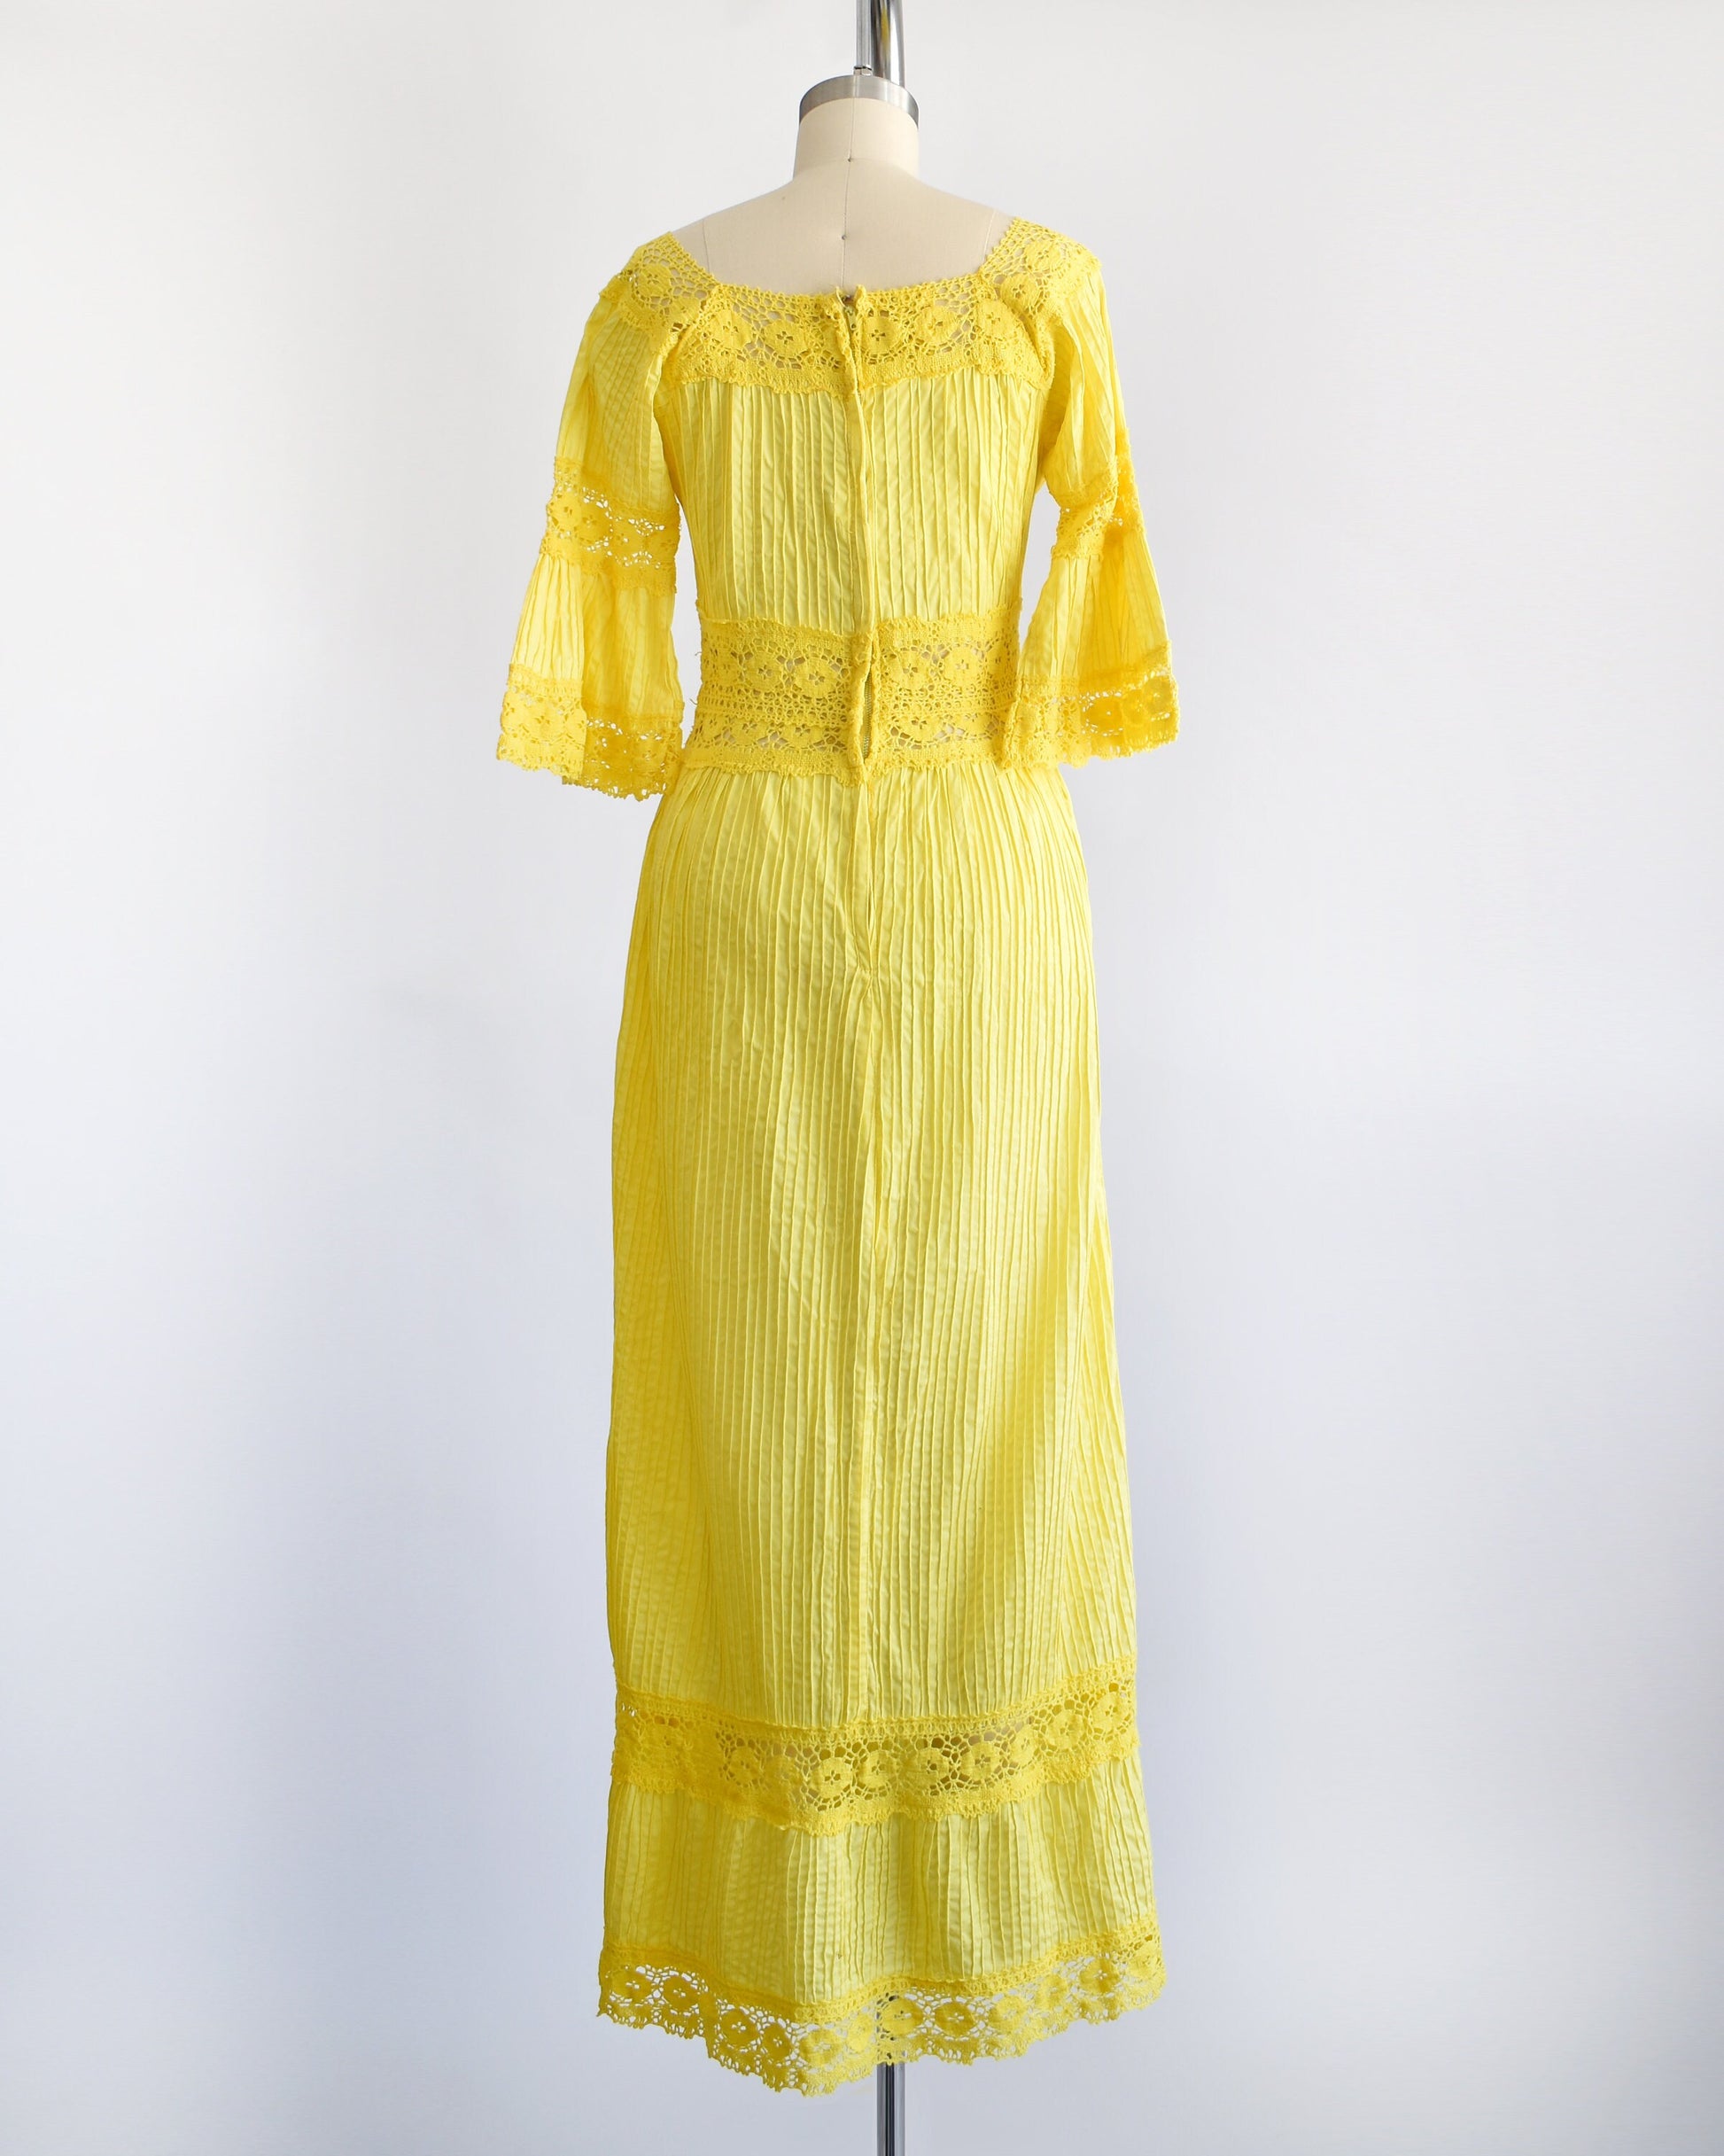 Back view of a vintage 70s yellow maxi dress with pin tuck pleats, along with lace trim around the collar, bell sleeves, waist, down the front, and around the hem. Zipper up the back. The dress is on a dress form.